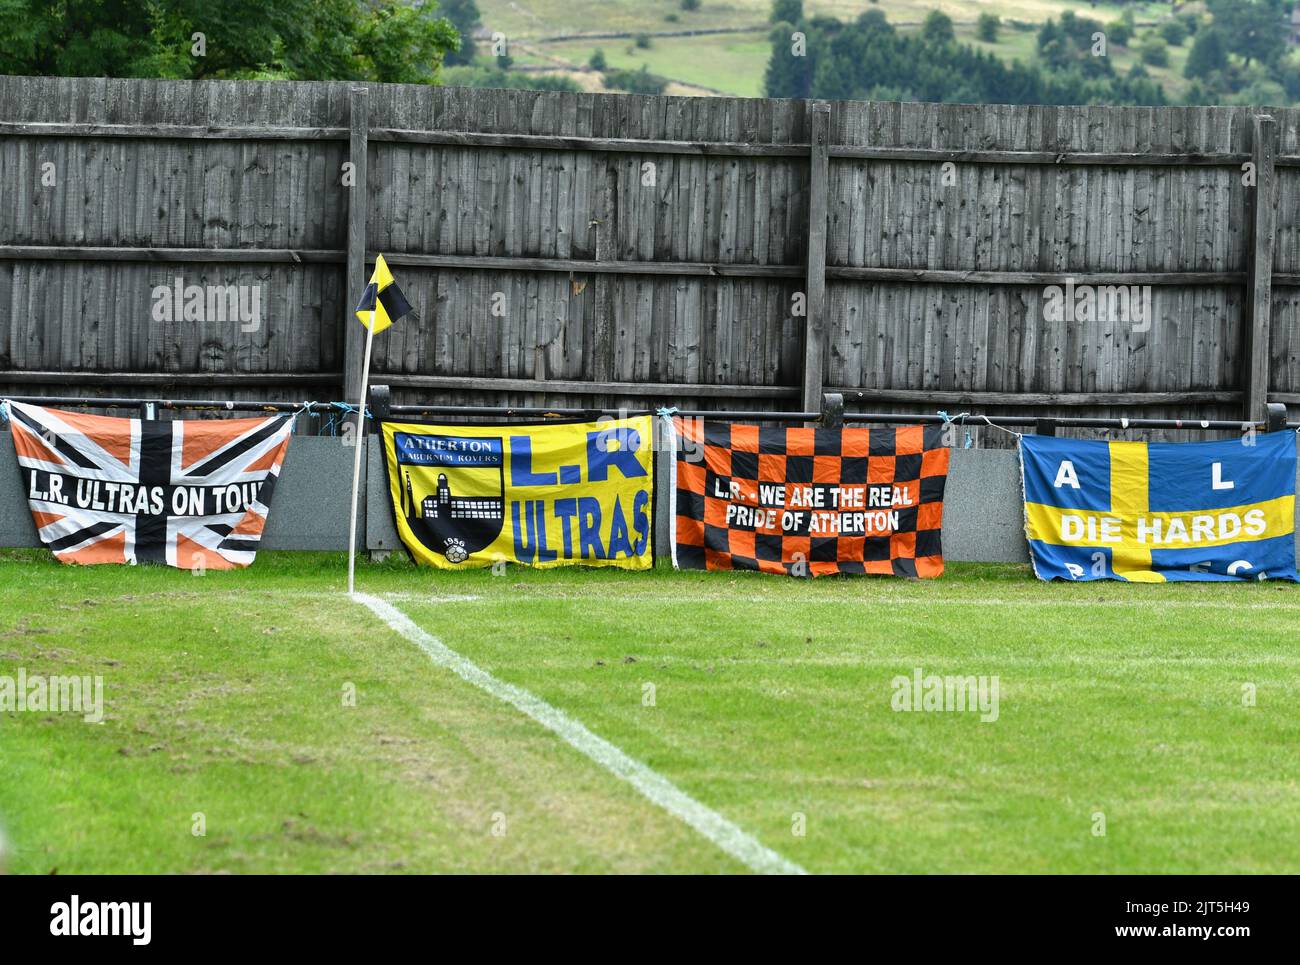 Banners showing support for Atherton LR Football team at the match against New Mills. Stock Photo